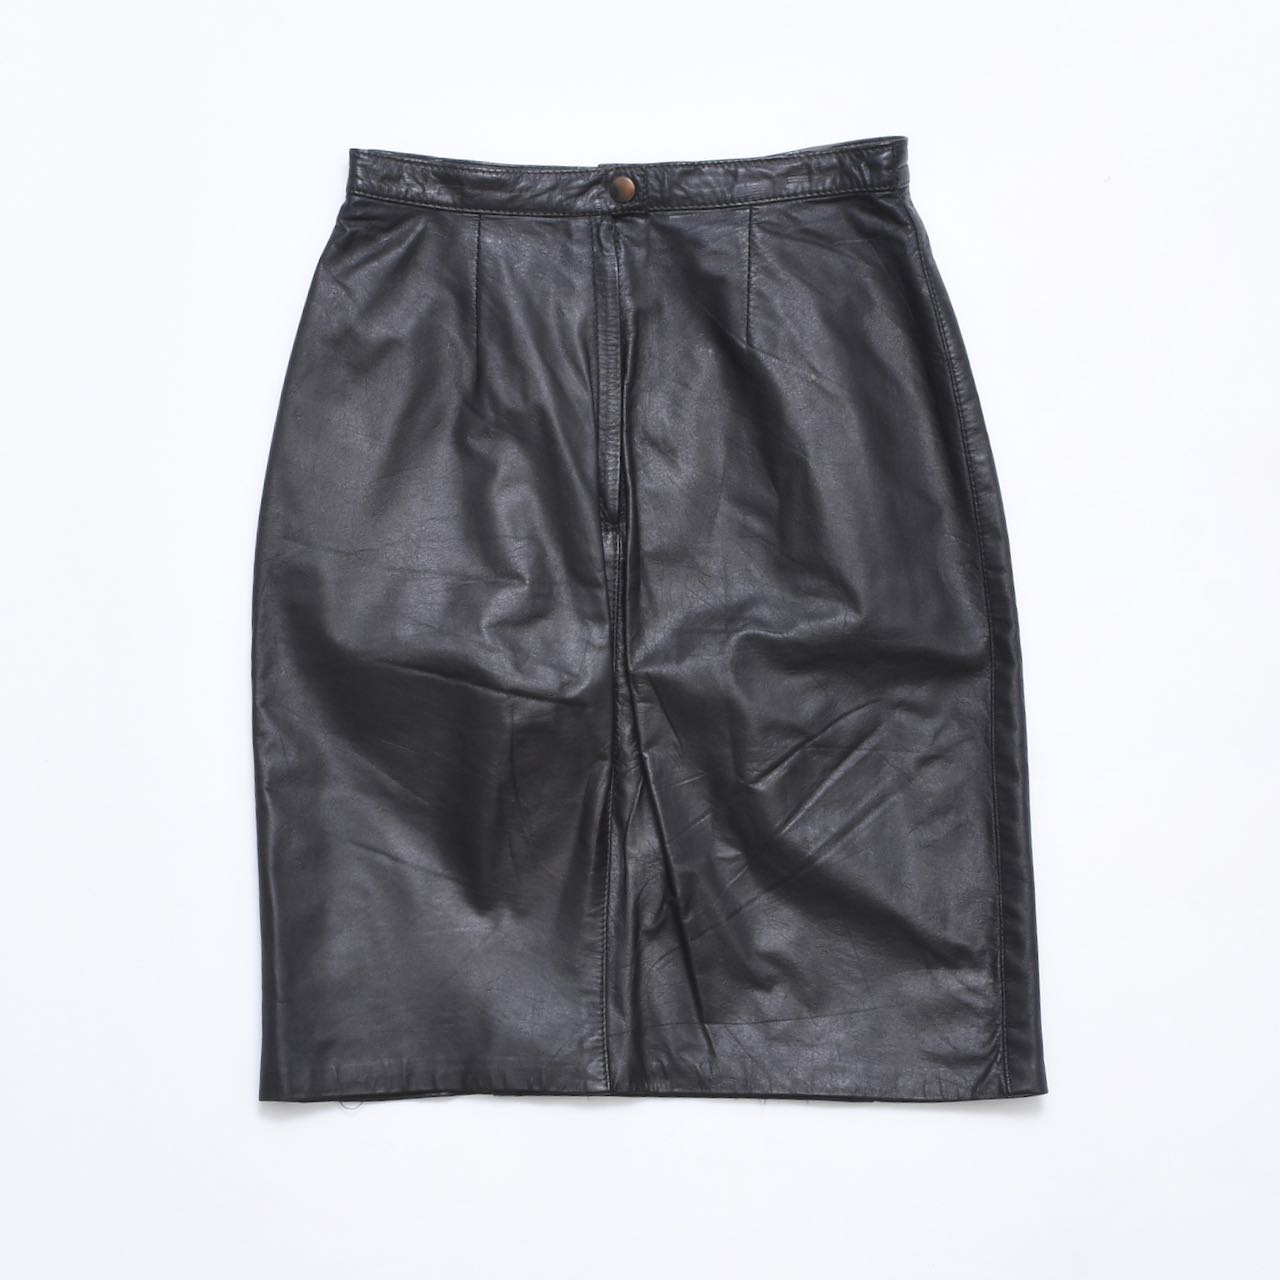 HdN "Midnight Hour" Leather Skirt, Vintage Select